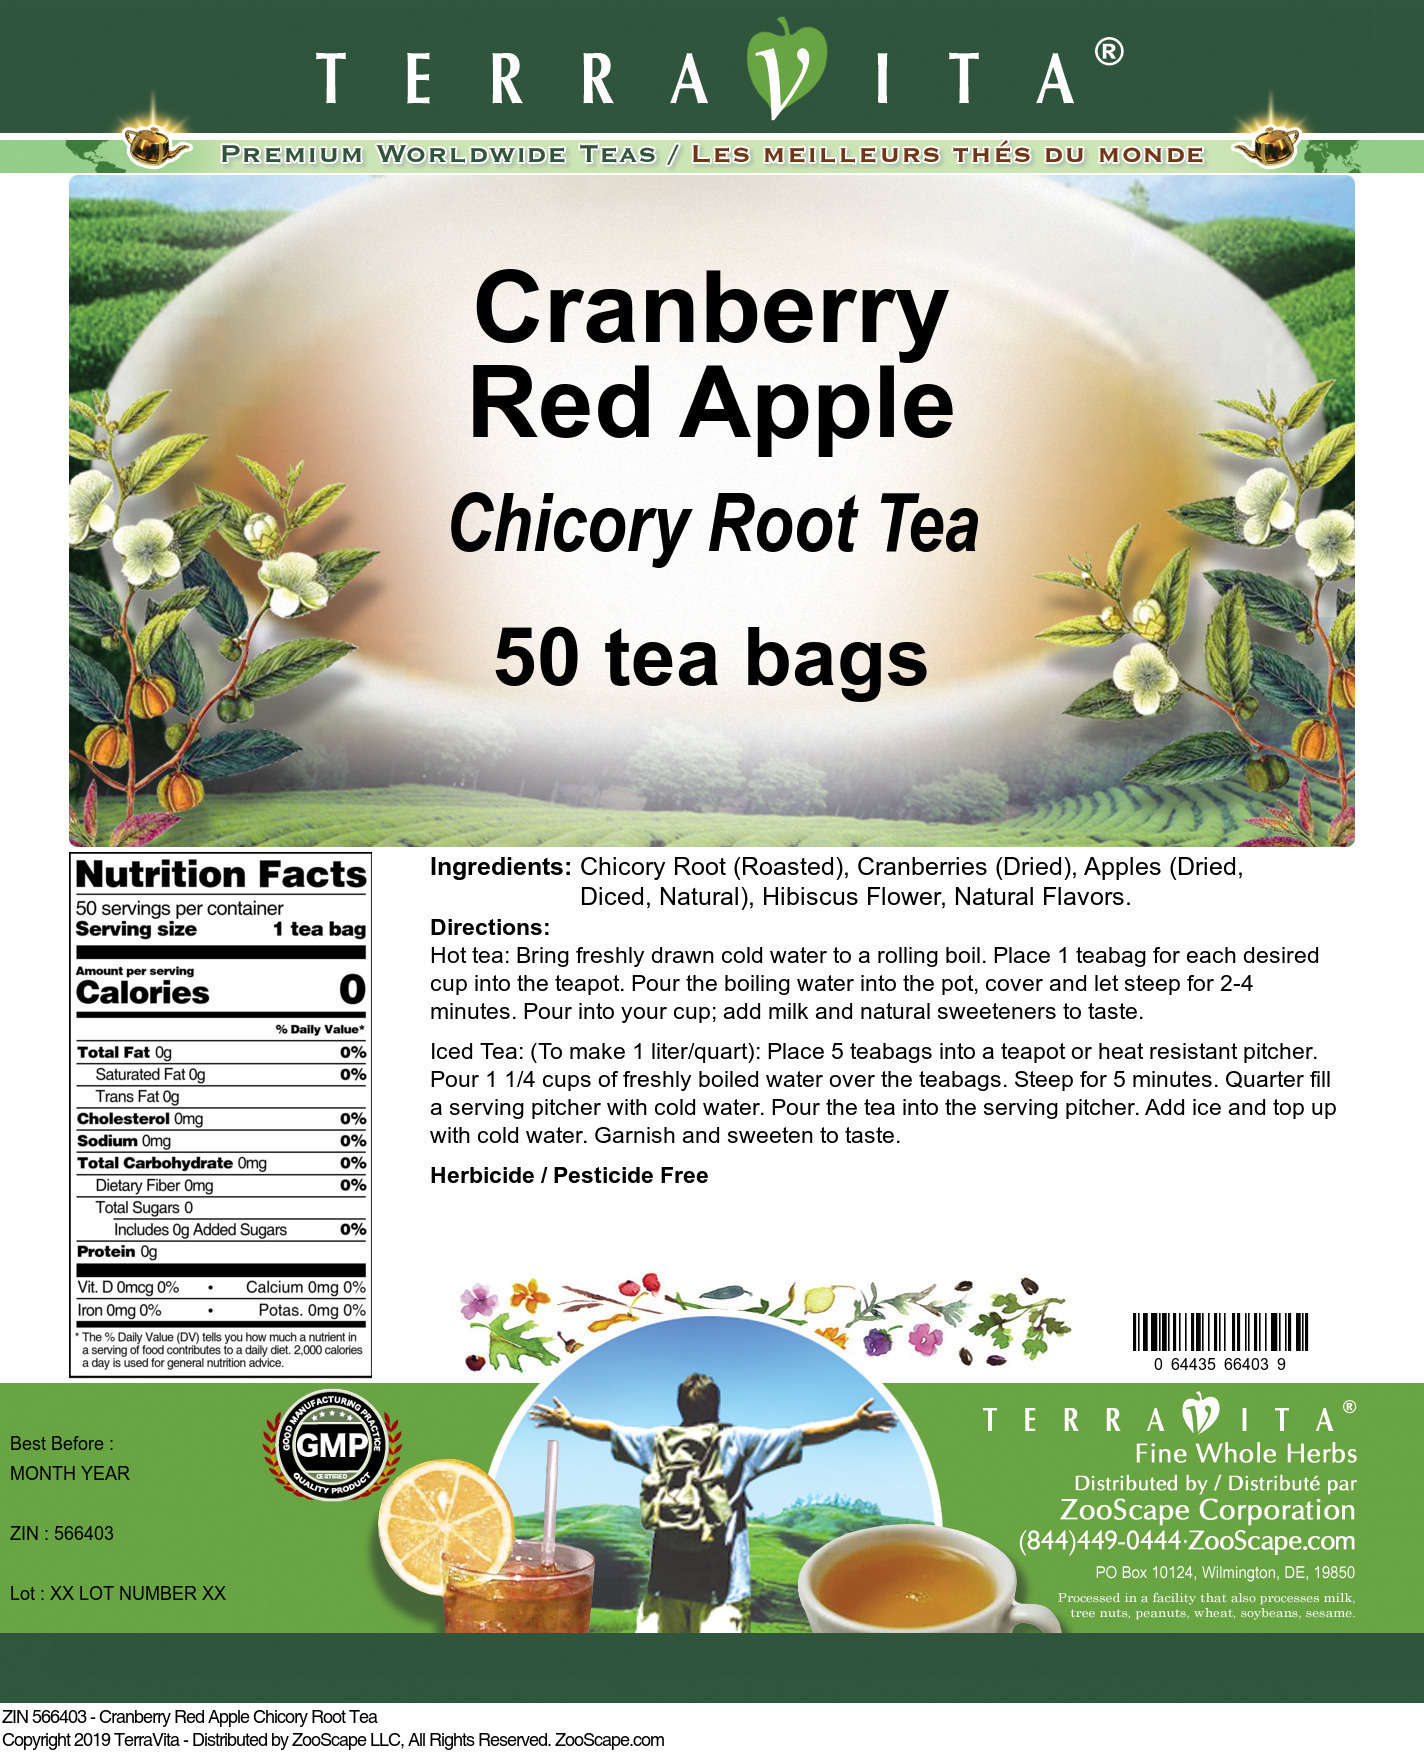 Cranberry Red Apple Chicory Root Tea - Label